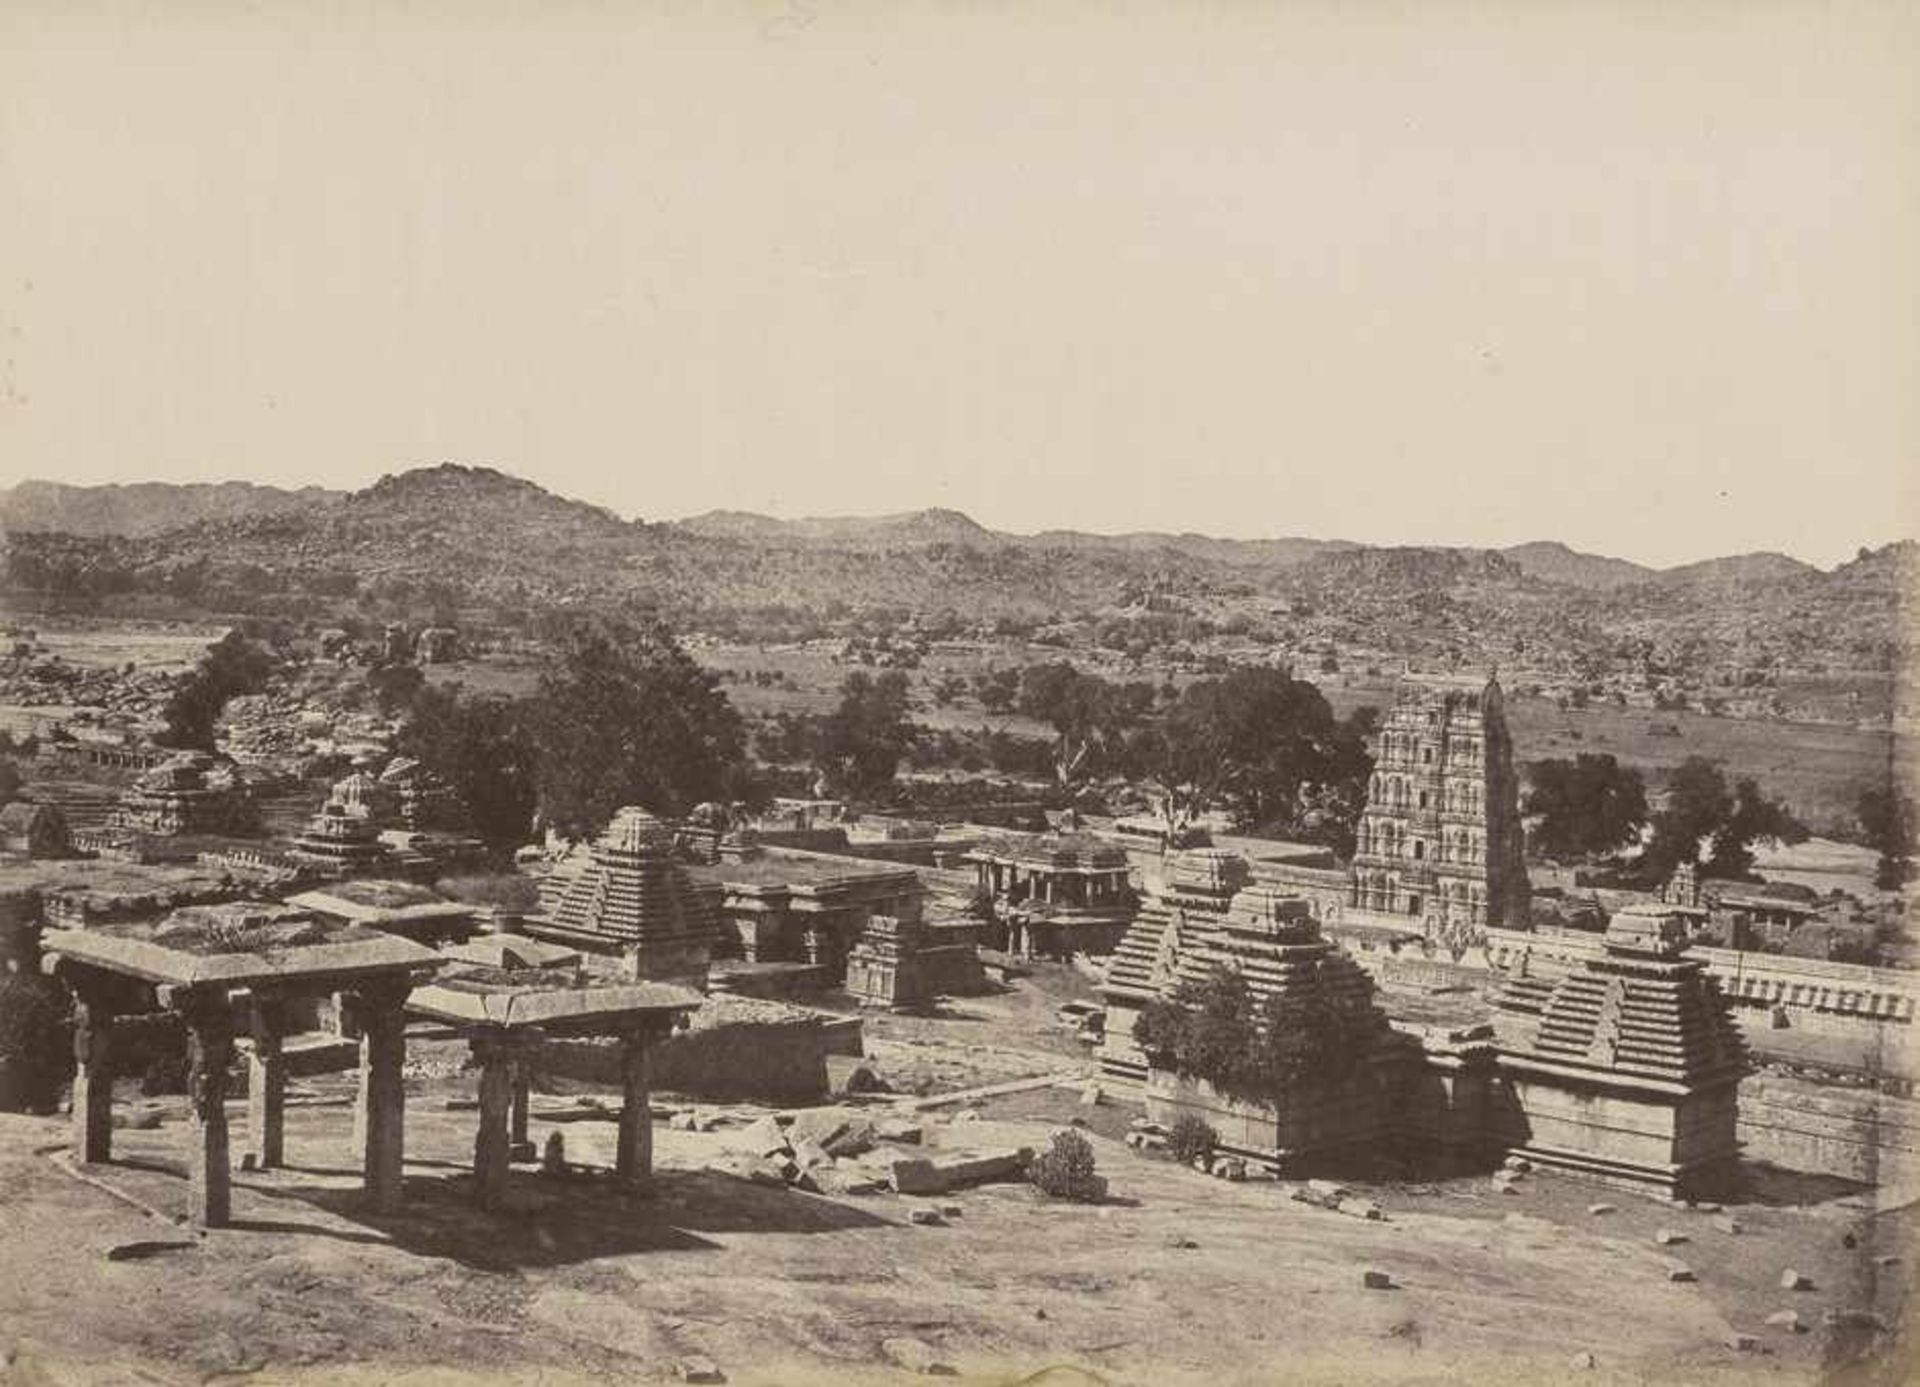 India: Images from "Architecture in Dharwar and Mysore" Photographer: William Henry Pigou (1818 -